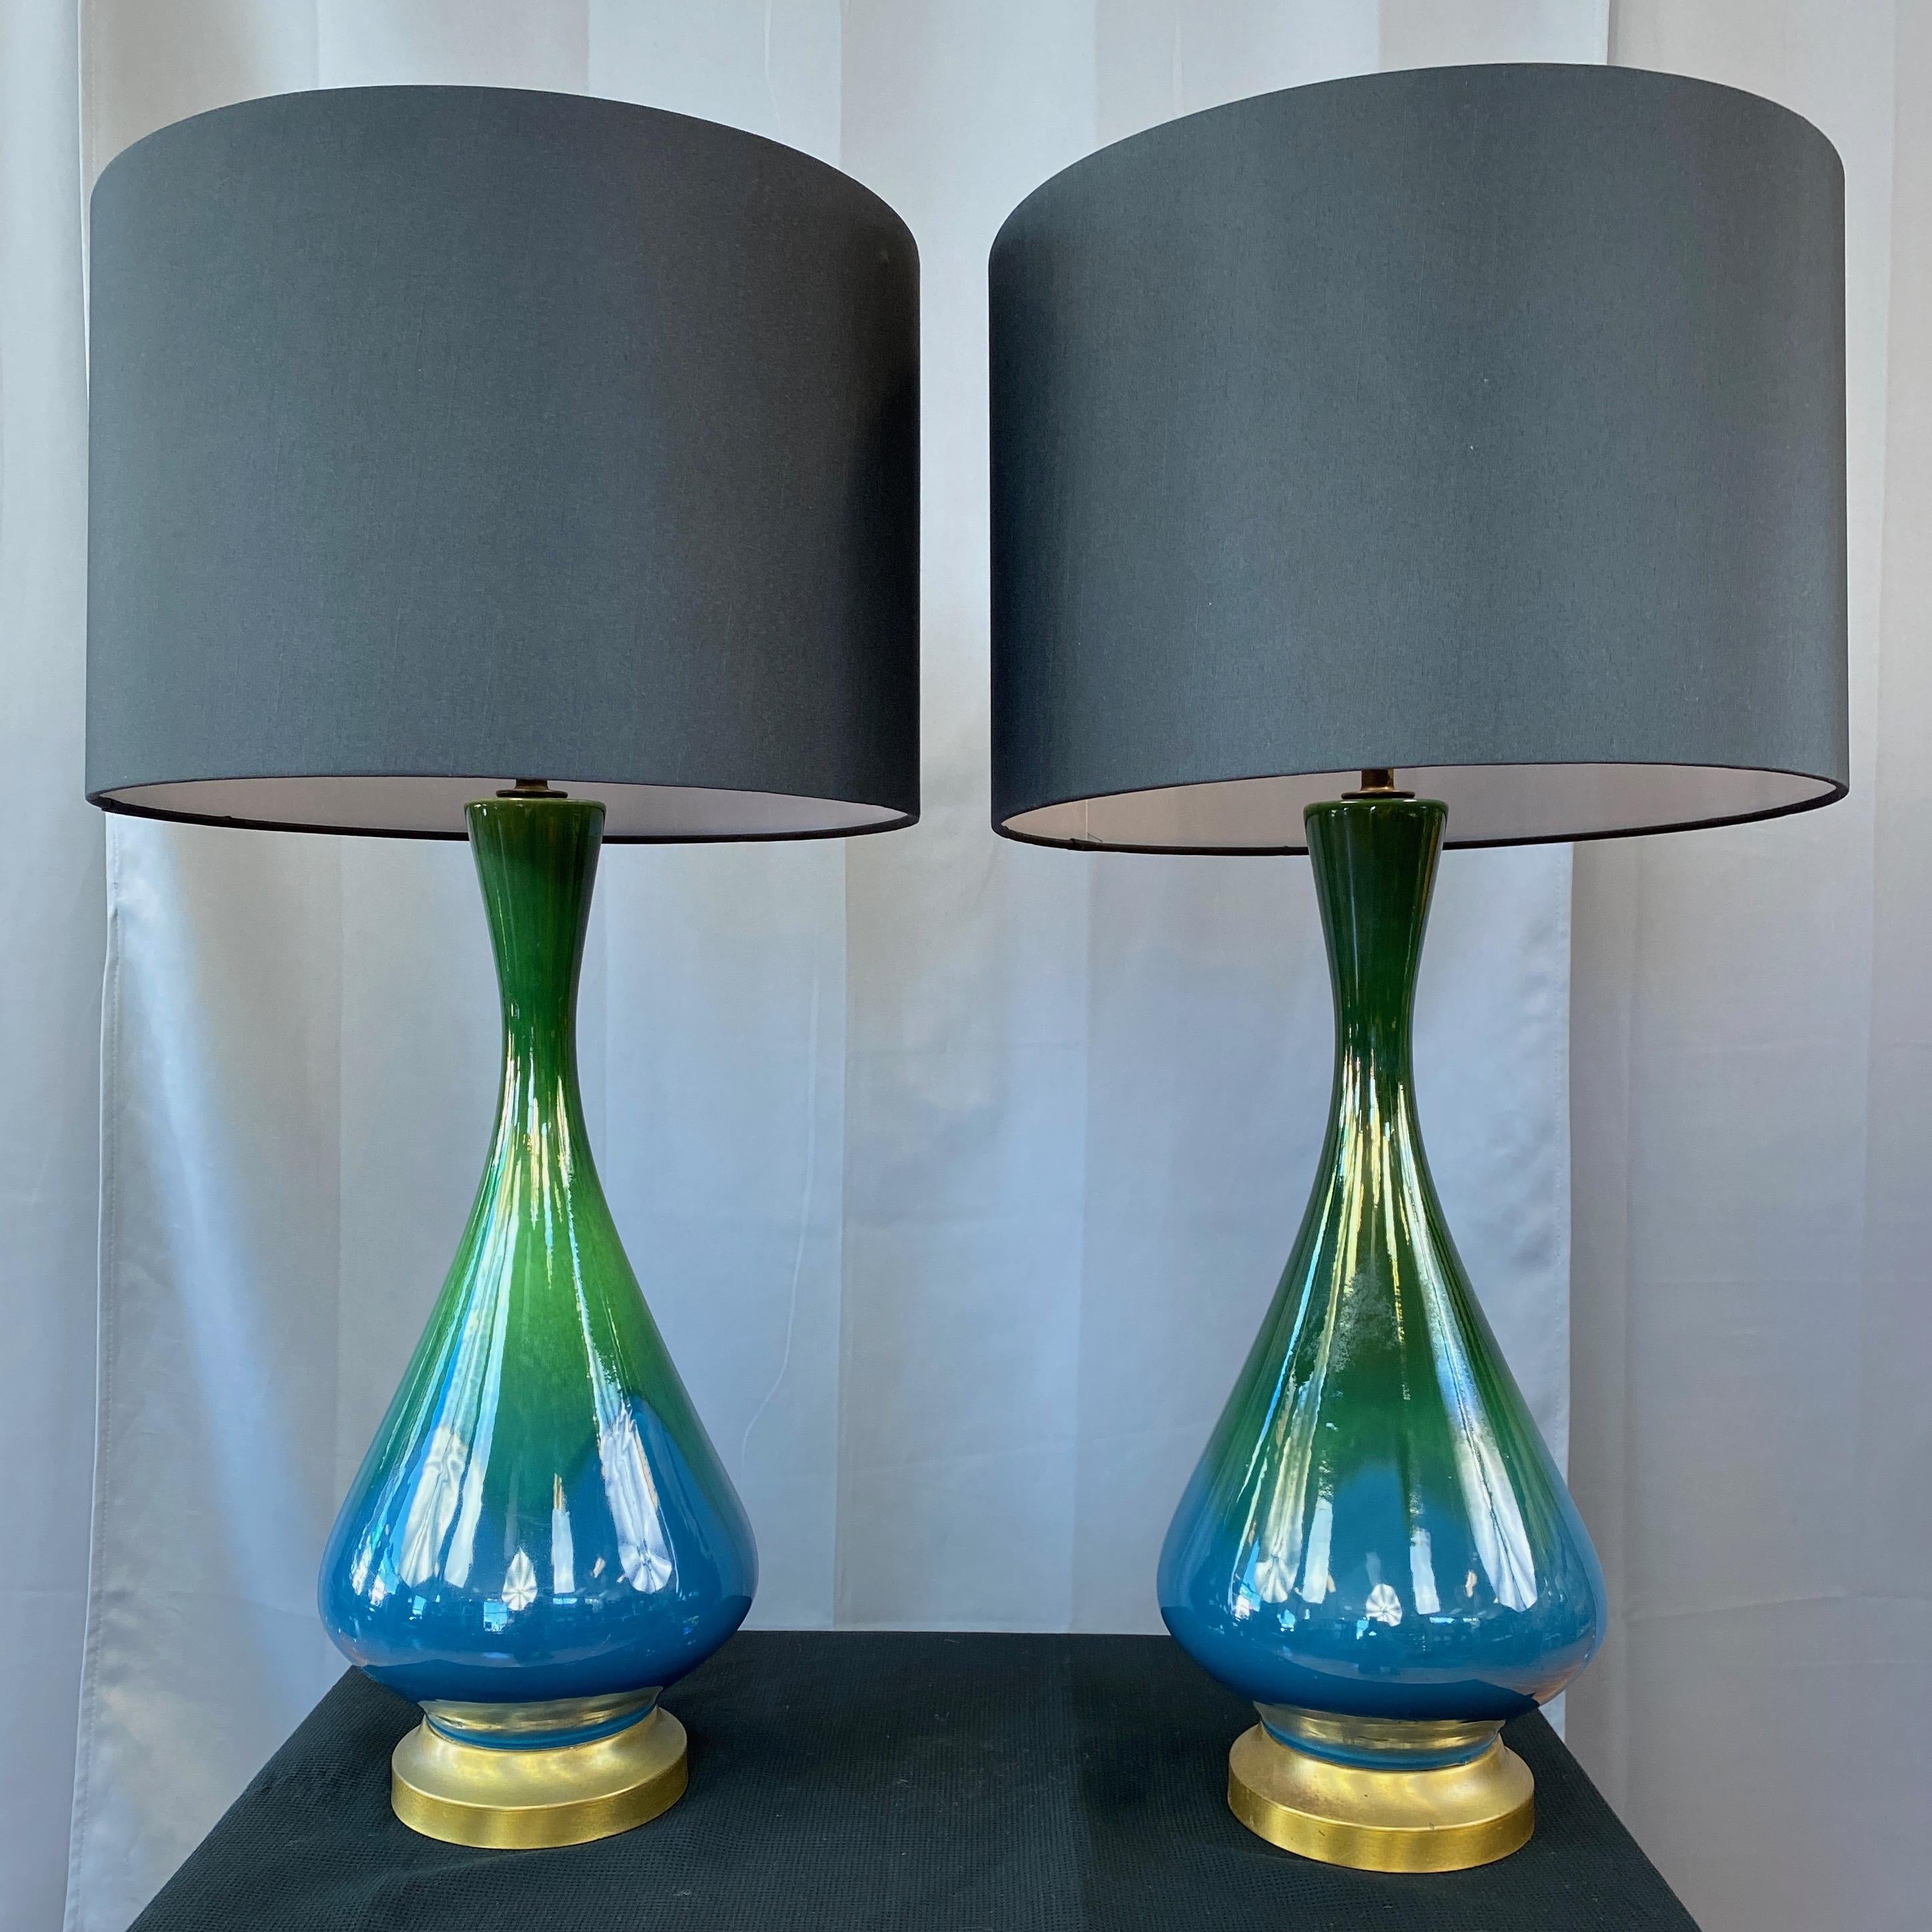 Pair of Blue-Green Ombré Glaze Ceramic and Brass Table Lamps with Shades, 1950s 3